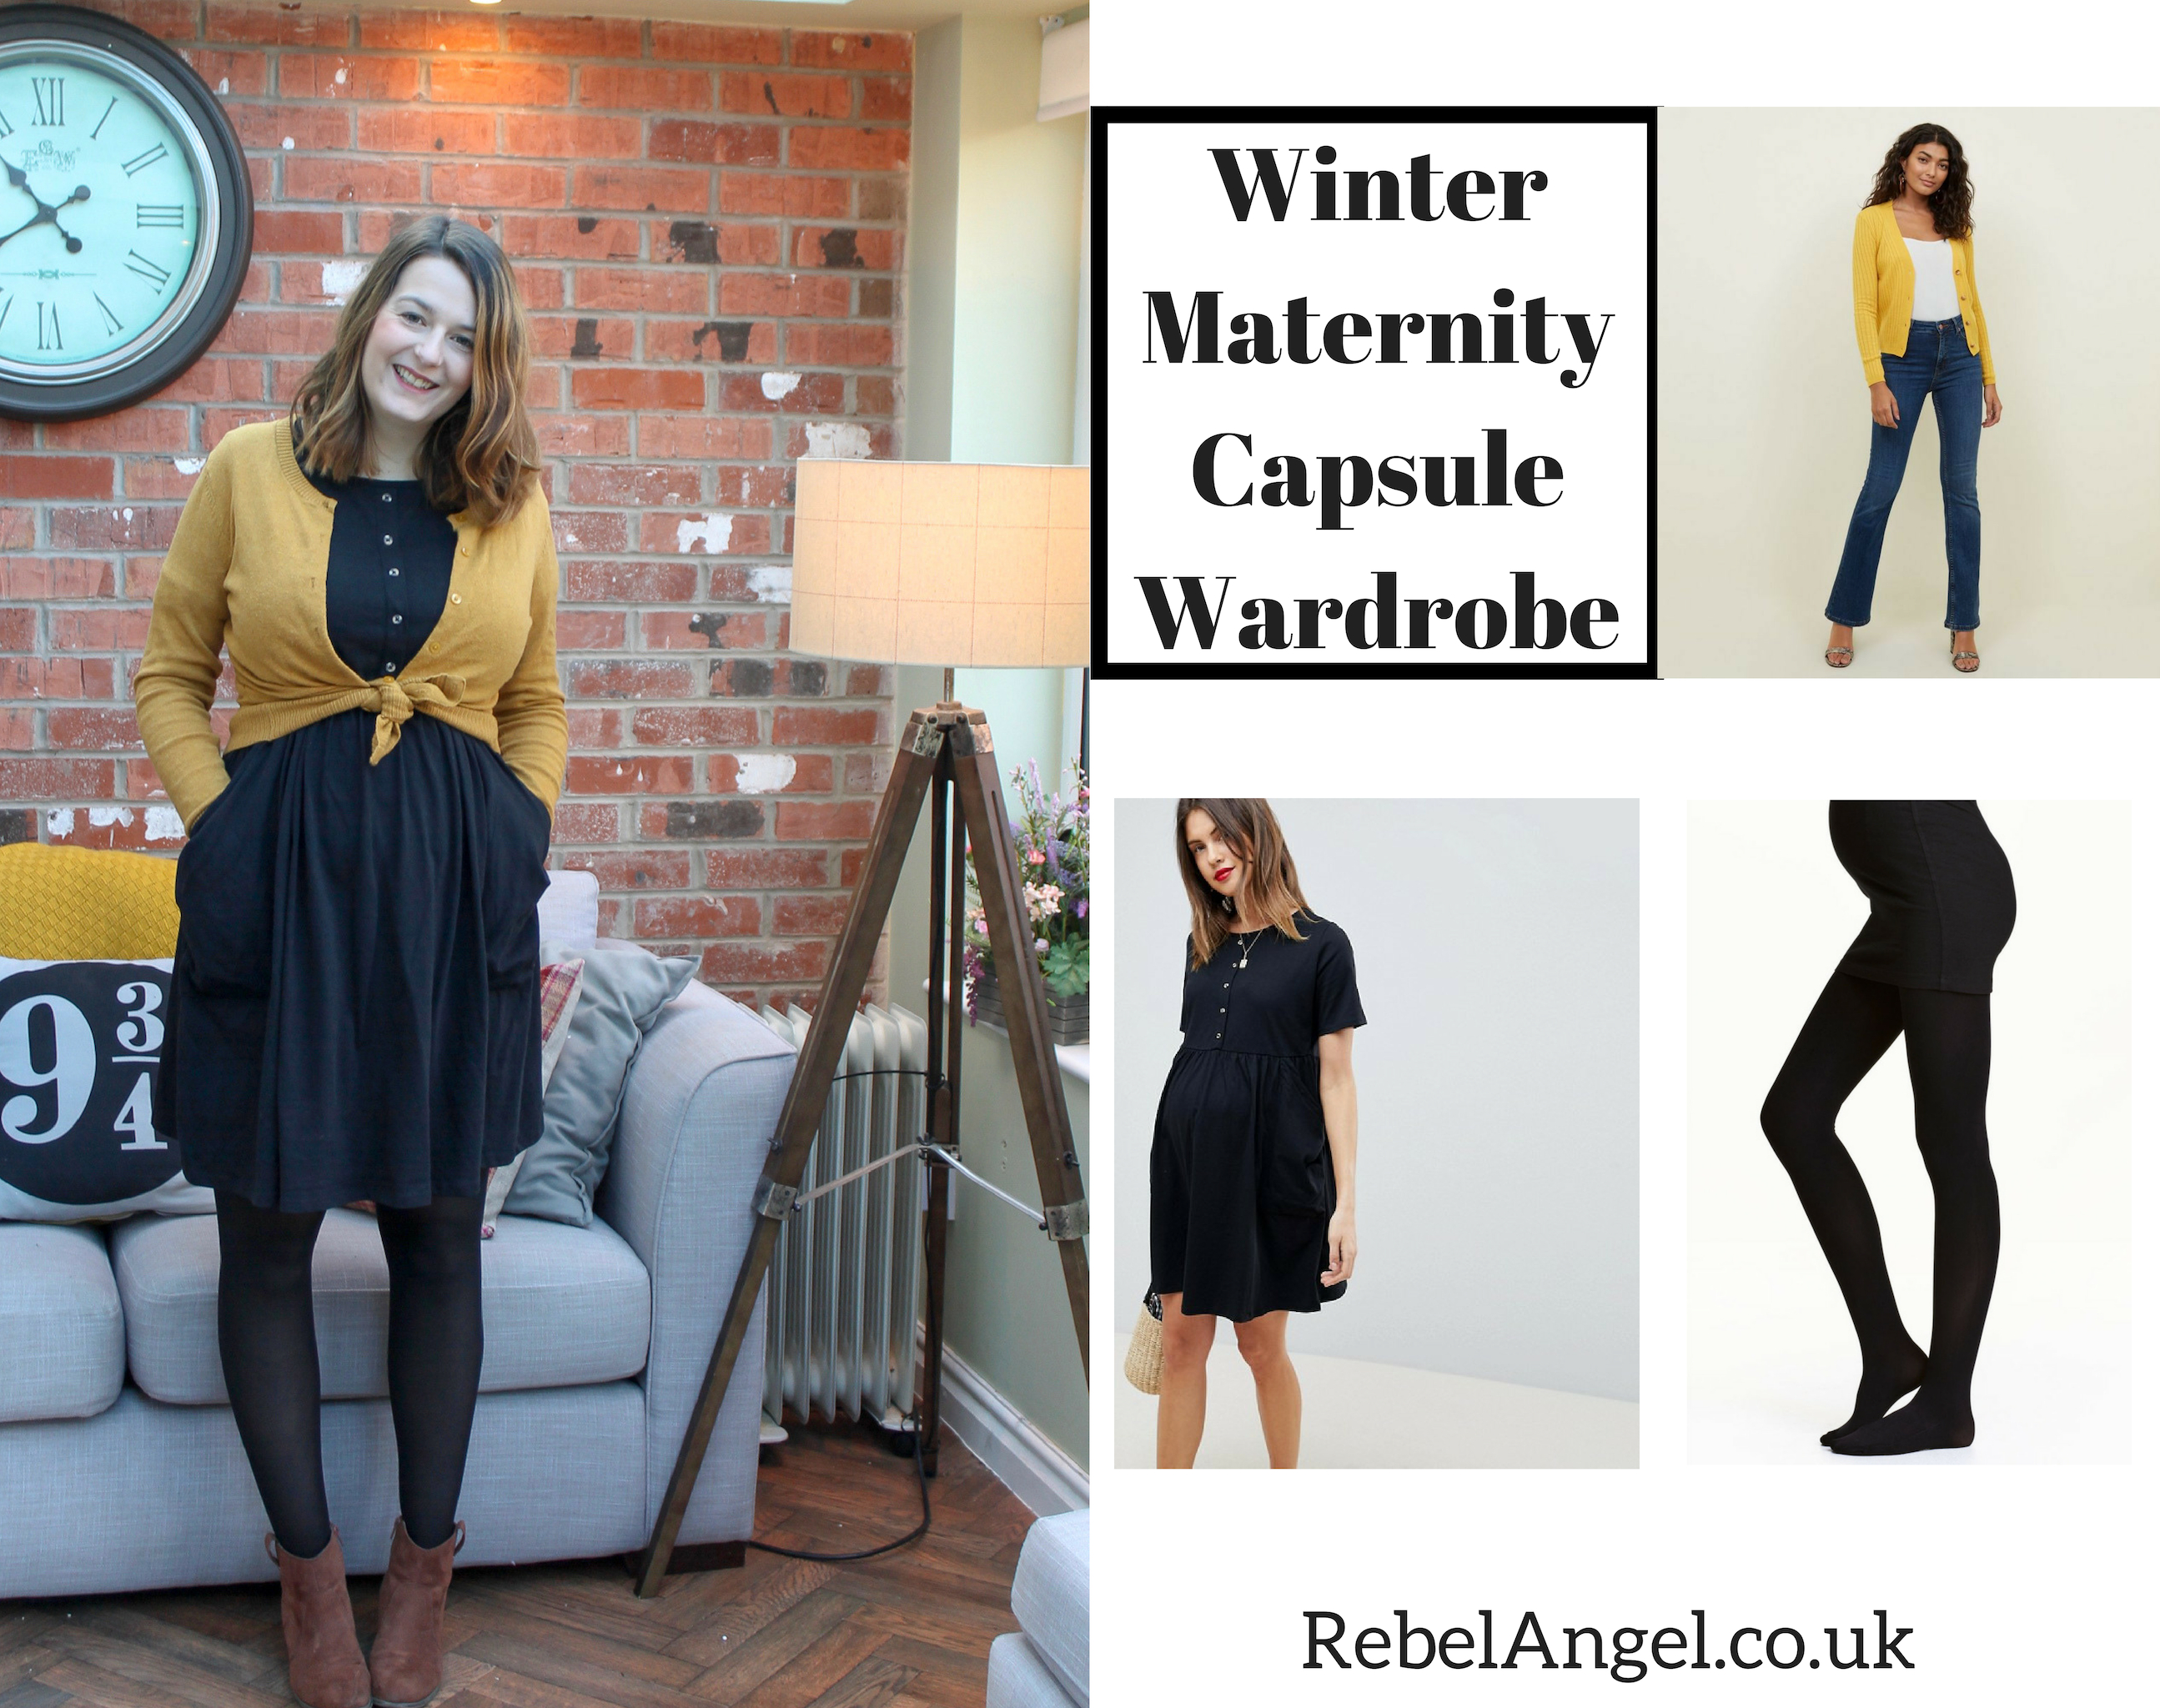 Winter Maternity Capsule Wardrobe outfit with black maternity dress & mustard cardigan